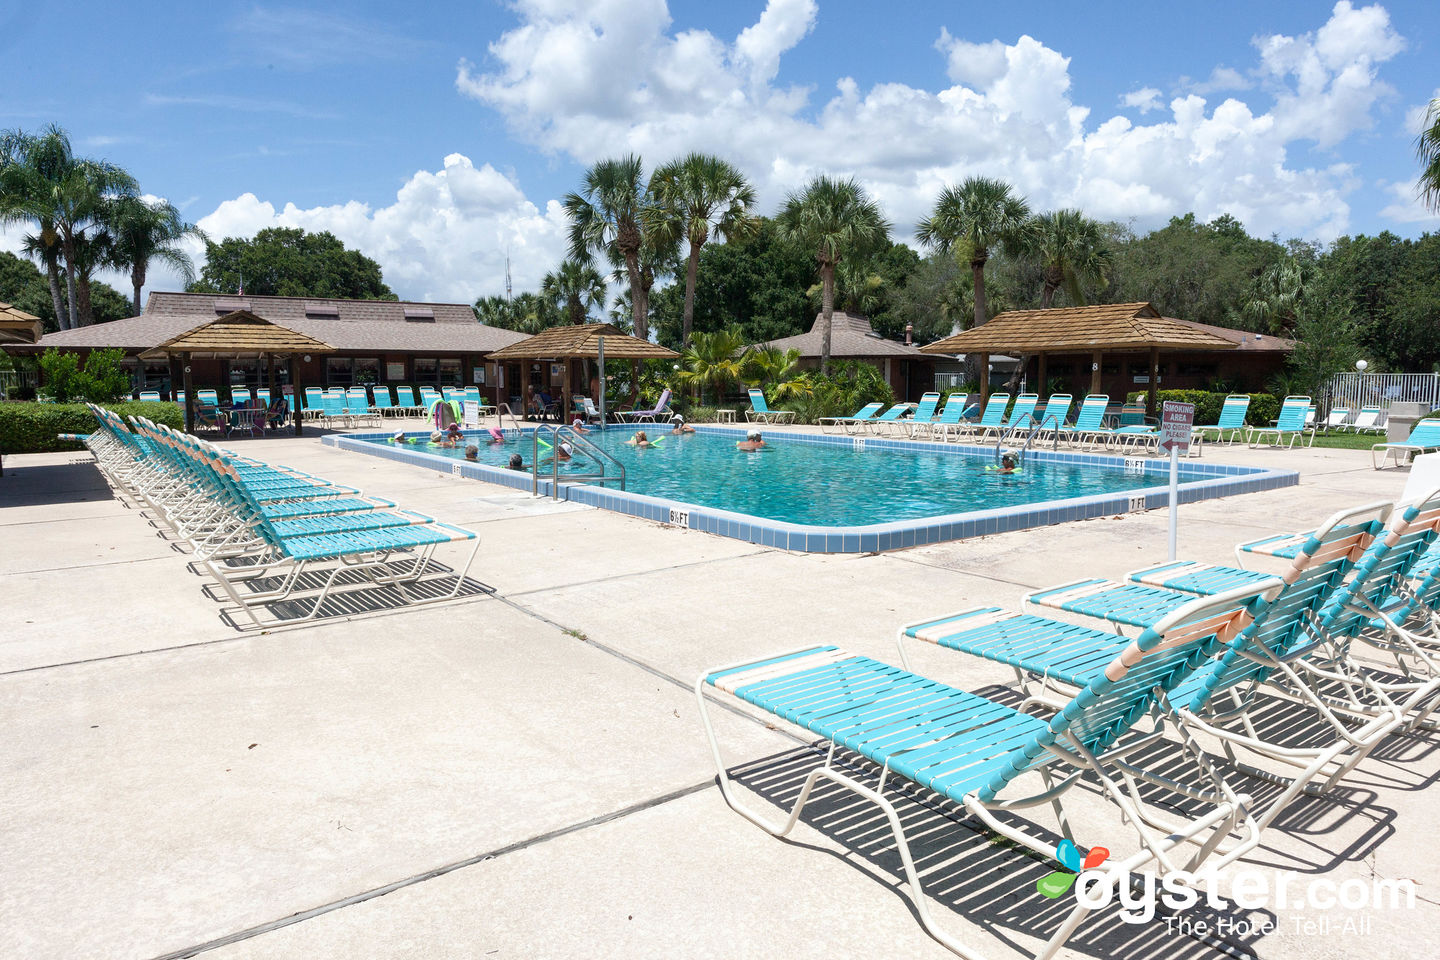 Naturist Transexuals - Cypress Cove Nudist Resort Review: What To REALLY Expect If You Stay